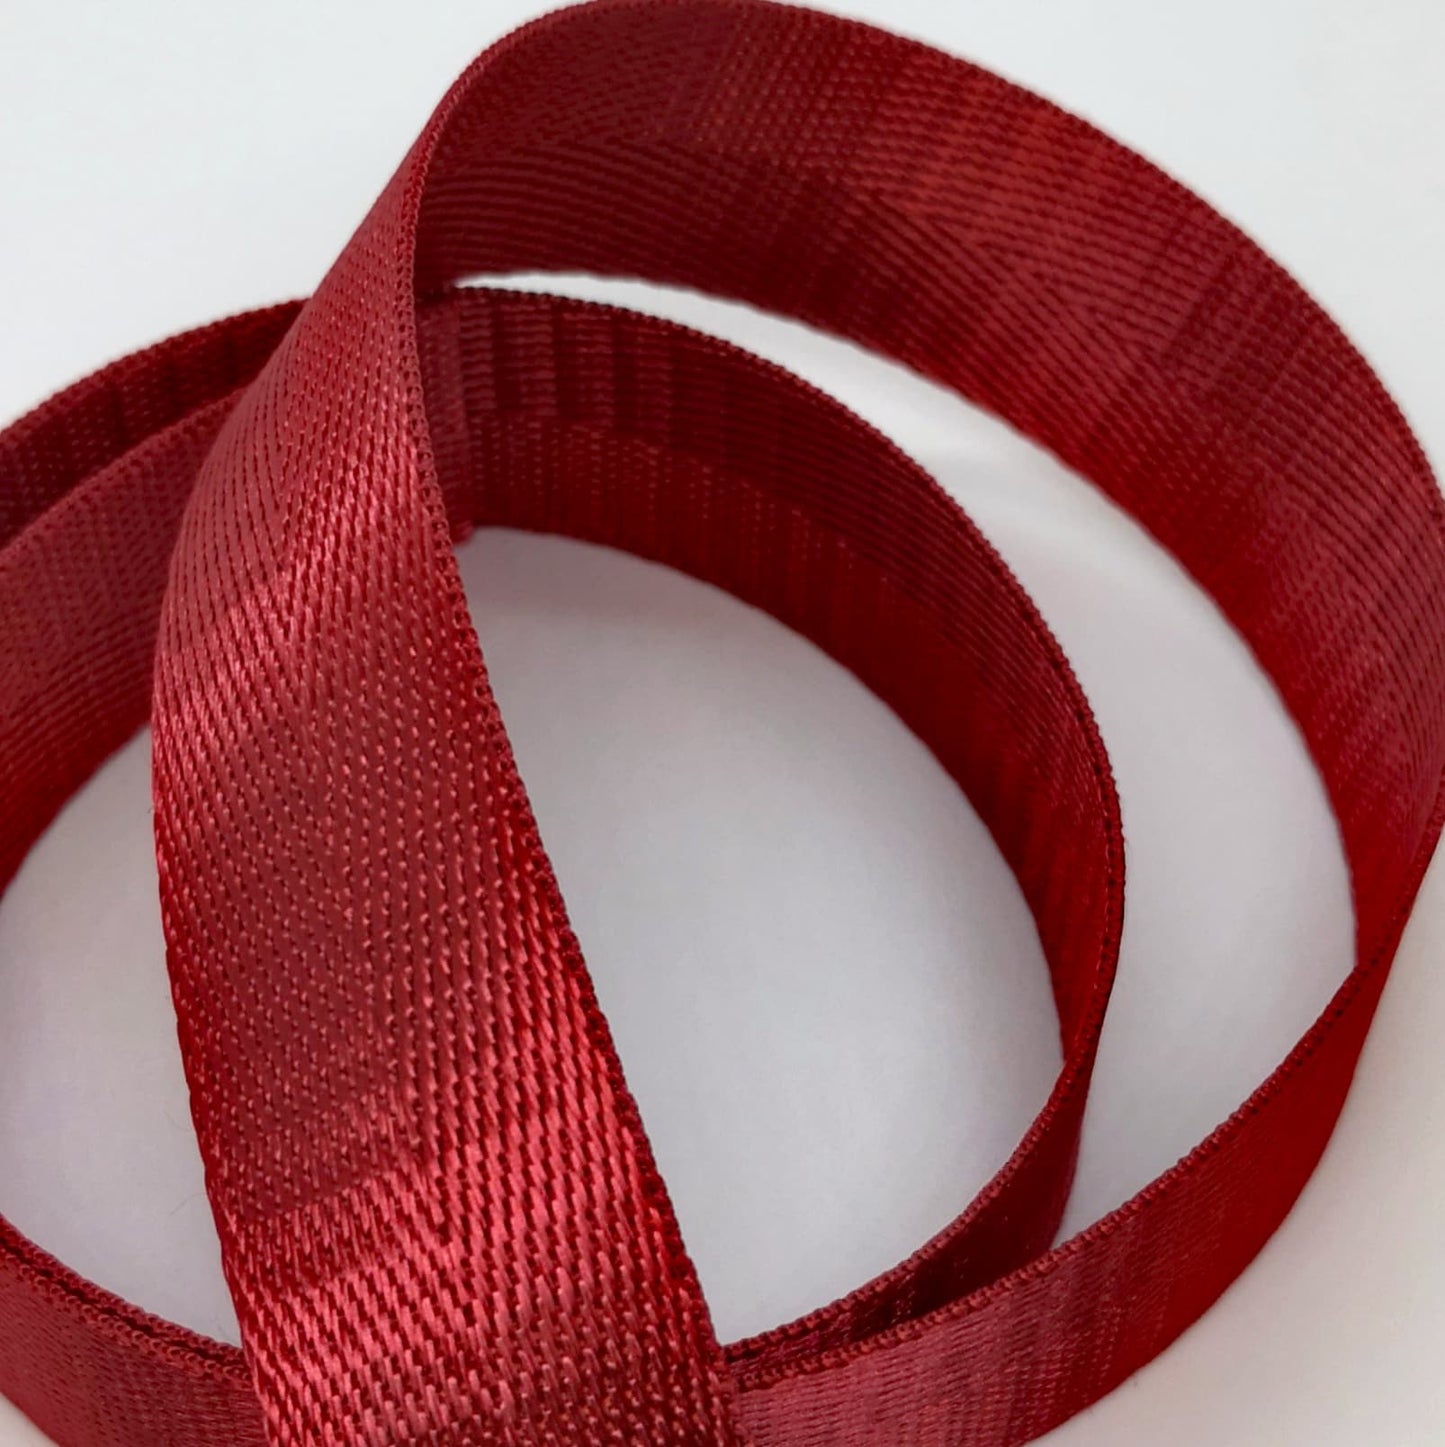 1" Wide Webbing -Solid Color - CHERRY RED